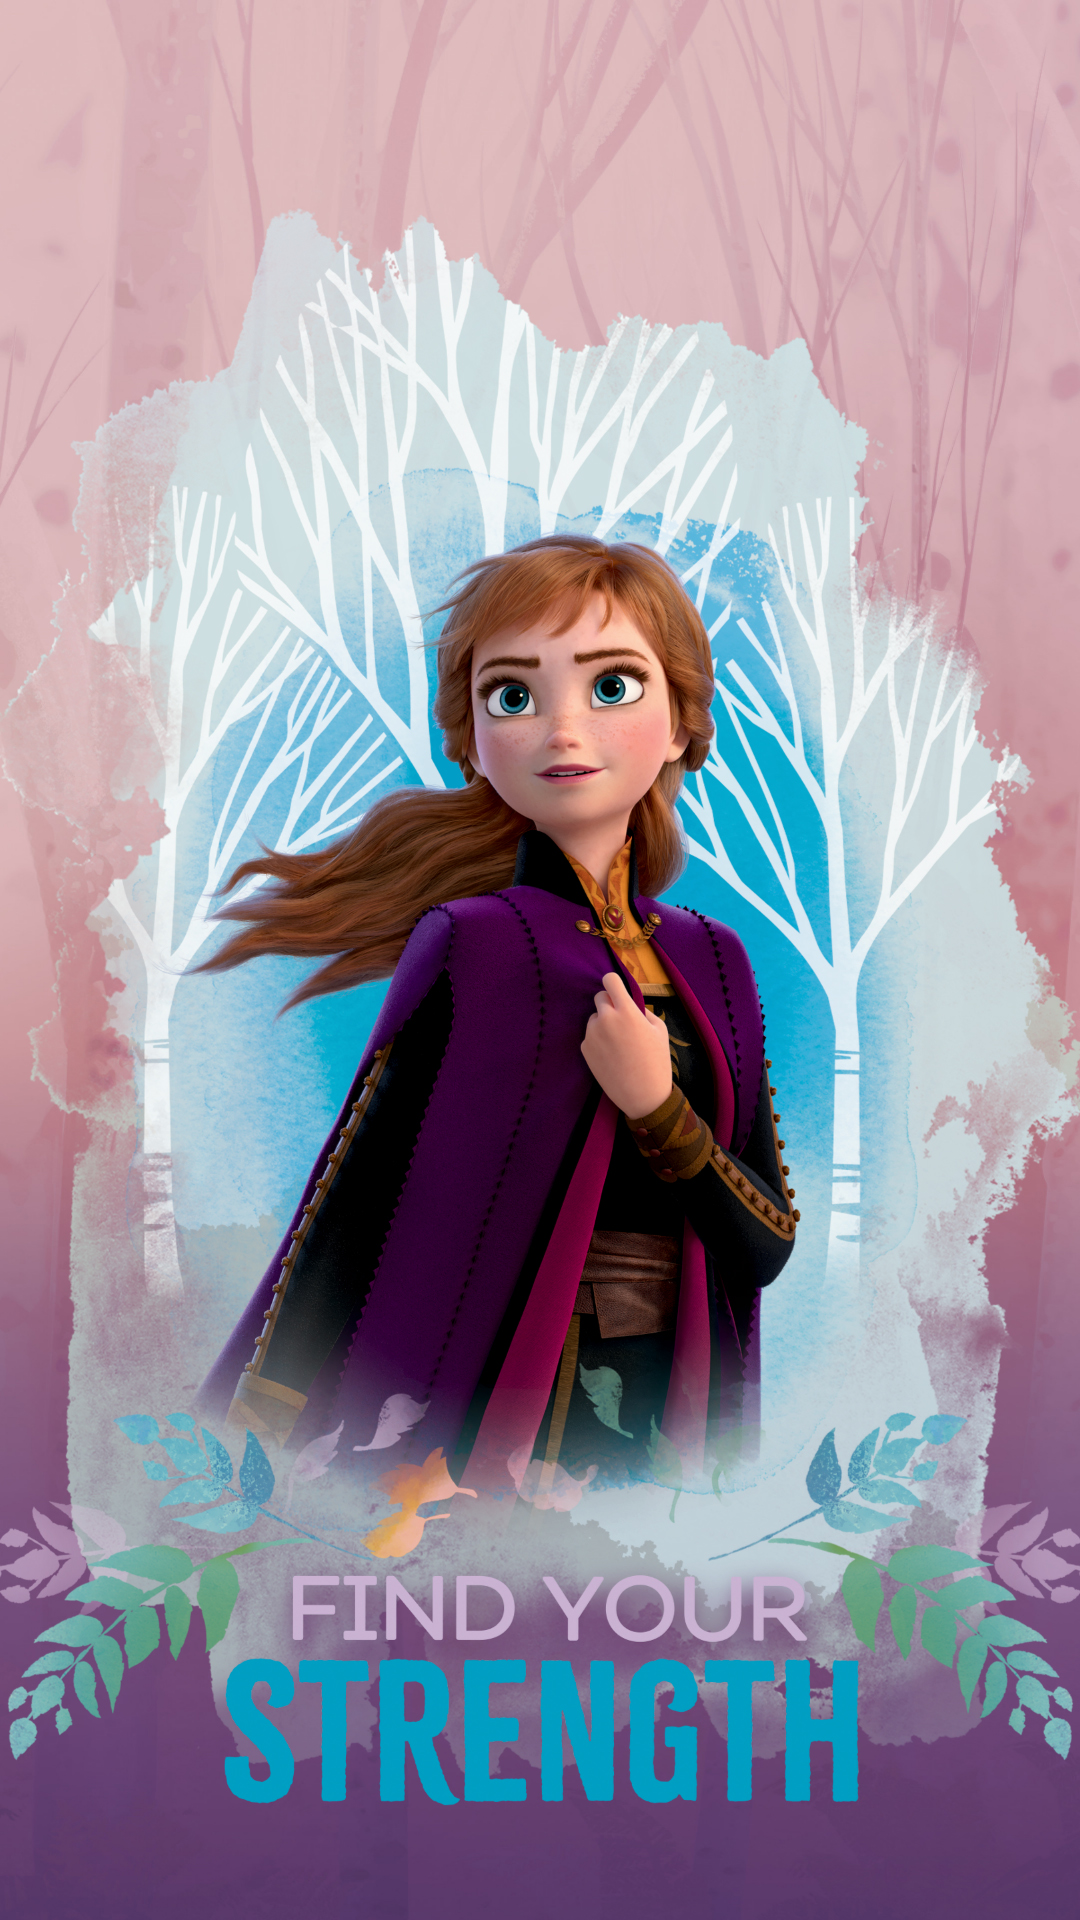 Anna Frozen 2 mobile wallpapers   YouLoveItcom